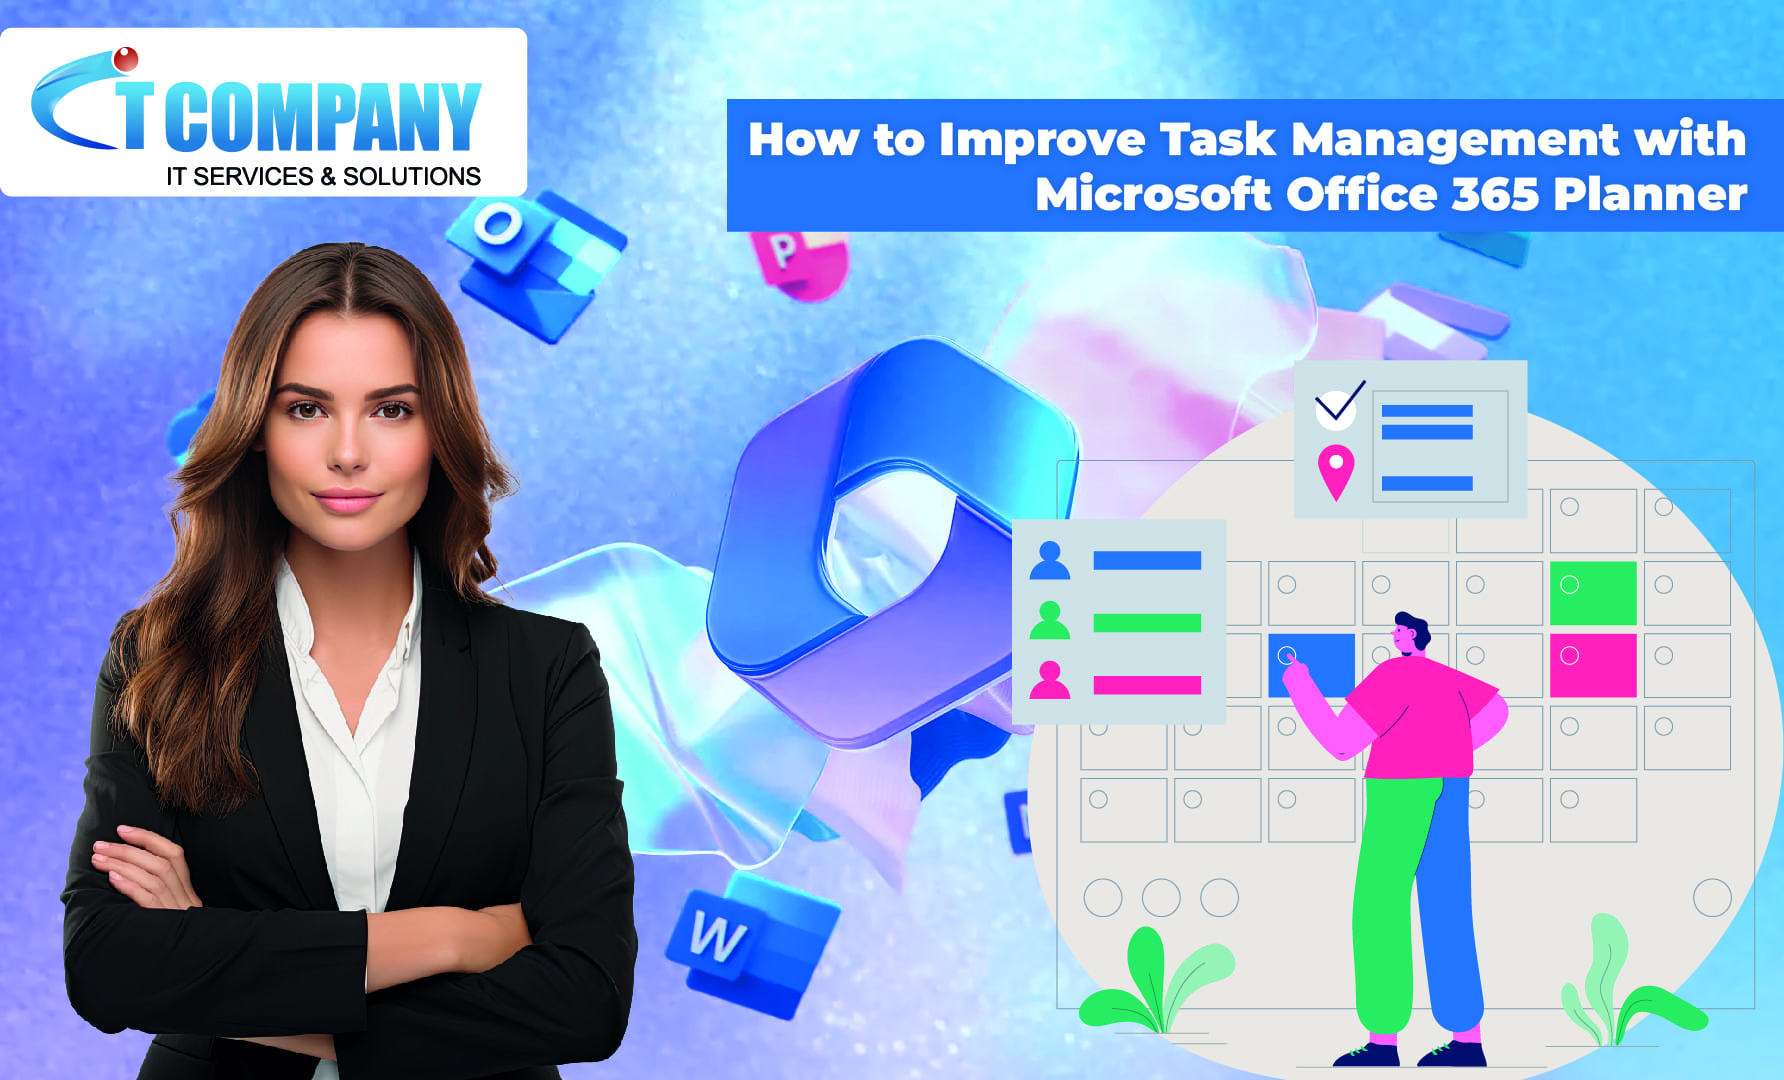 How to Improve Task Management with Microsoft Office 365 Planner